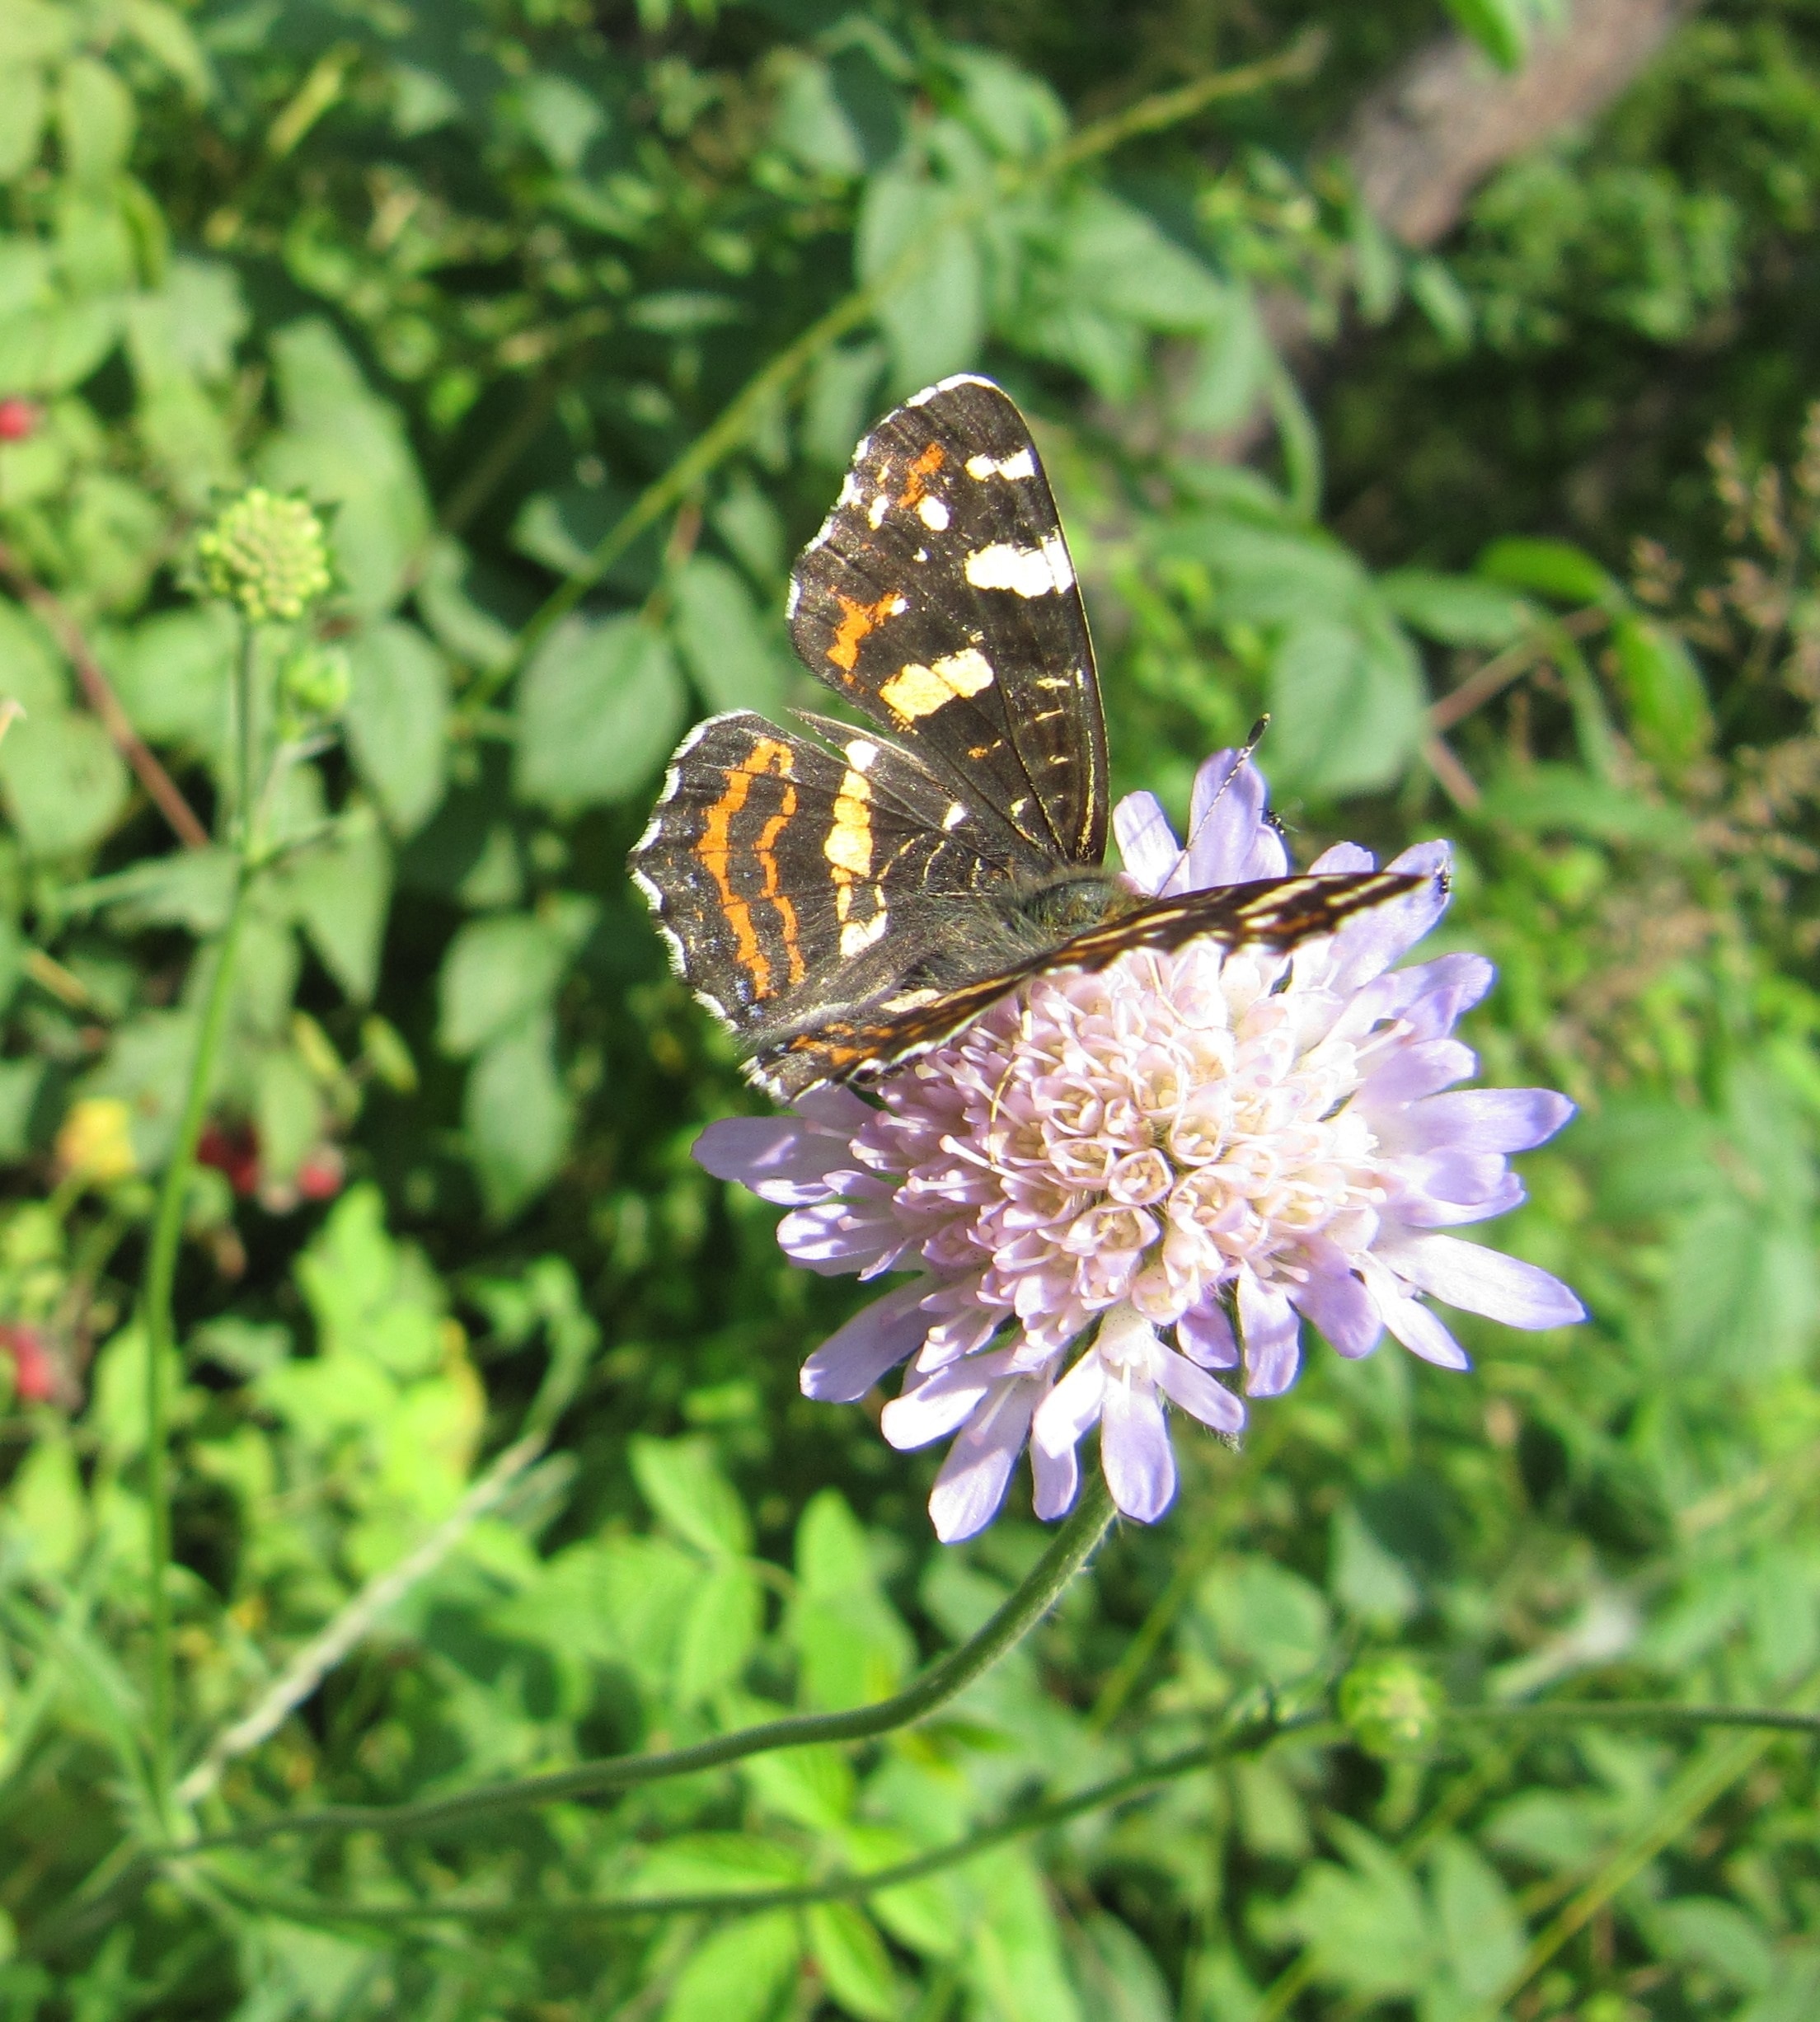 black and yellow butterfly on purple flower during daytime